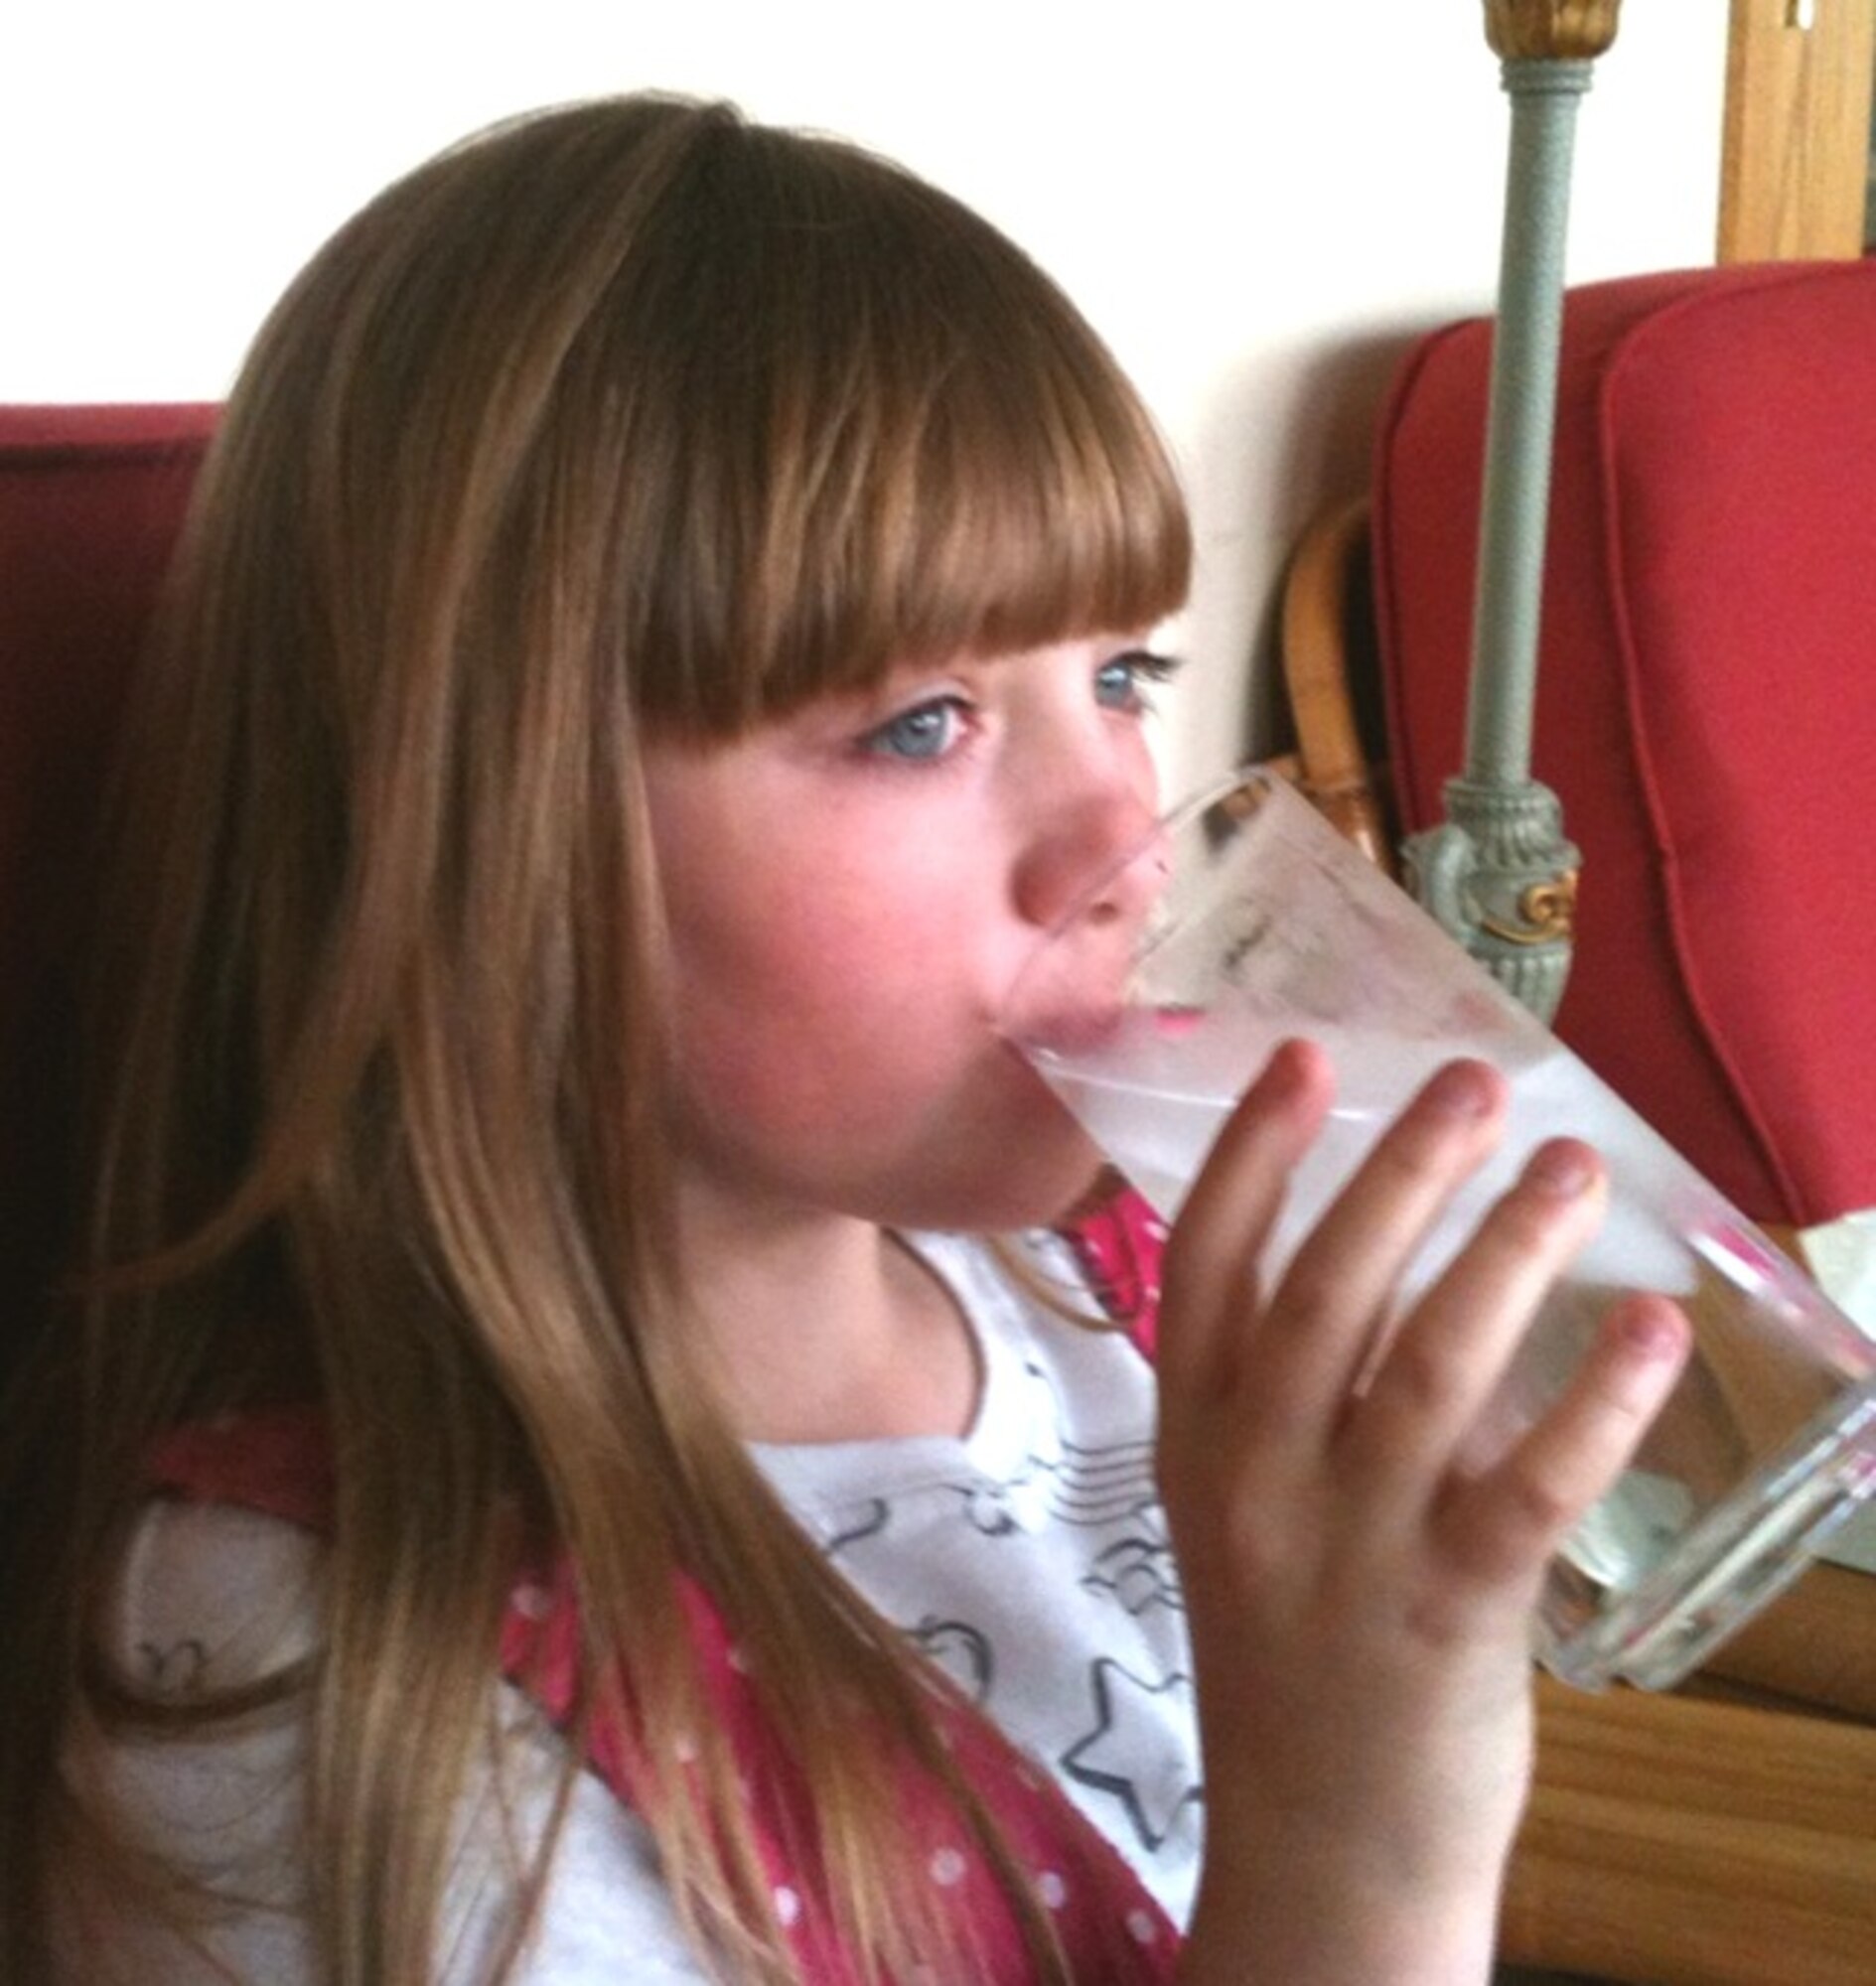 Drinking water helps keep people young and old hydrated. (Photo by Kimberly McSparran) 